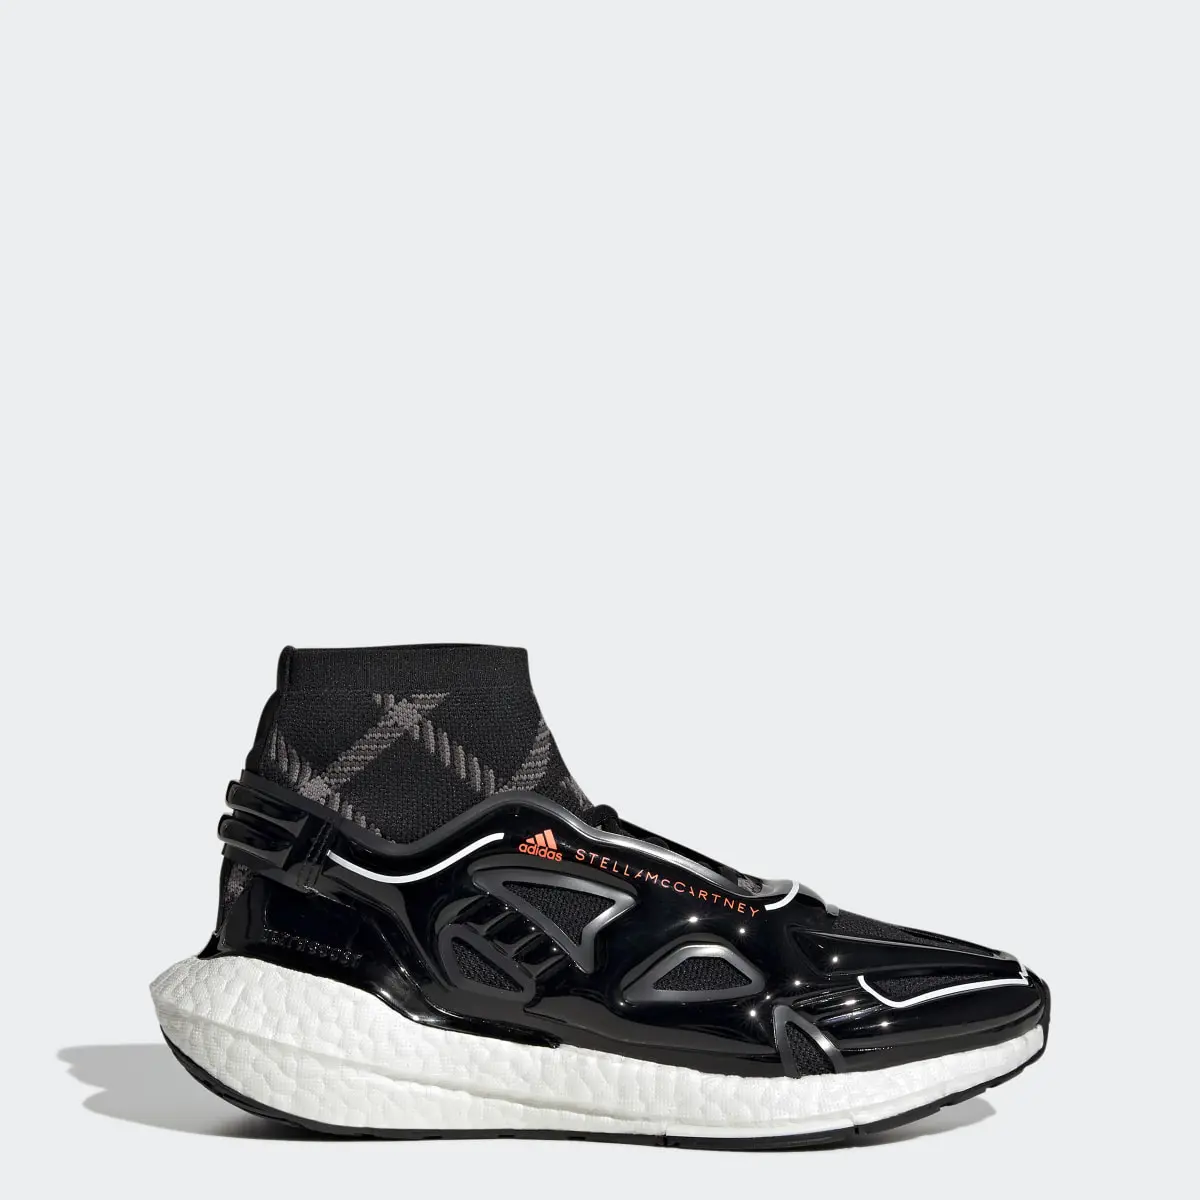 Adidas by Stella McCartney Ultraboost 22 Elevated Shoes. 1